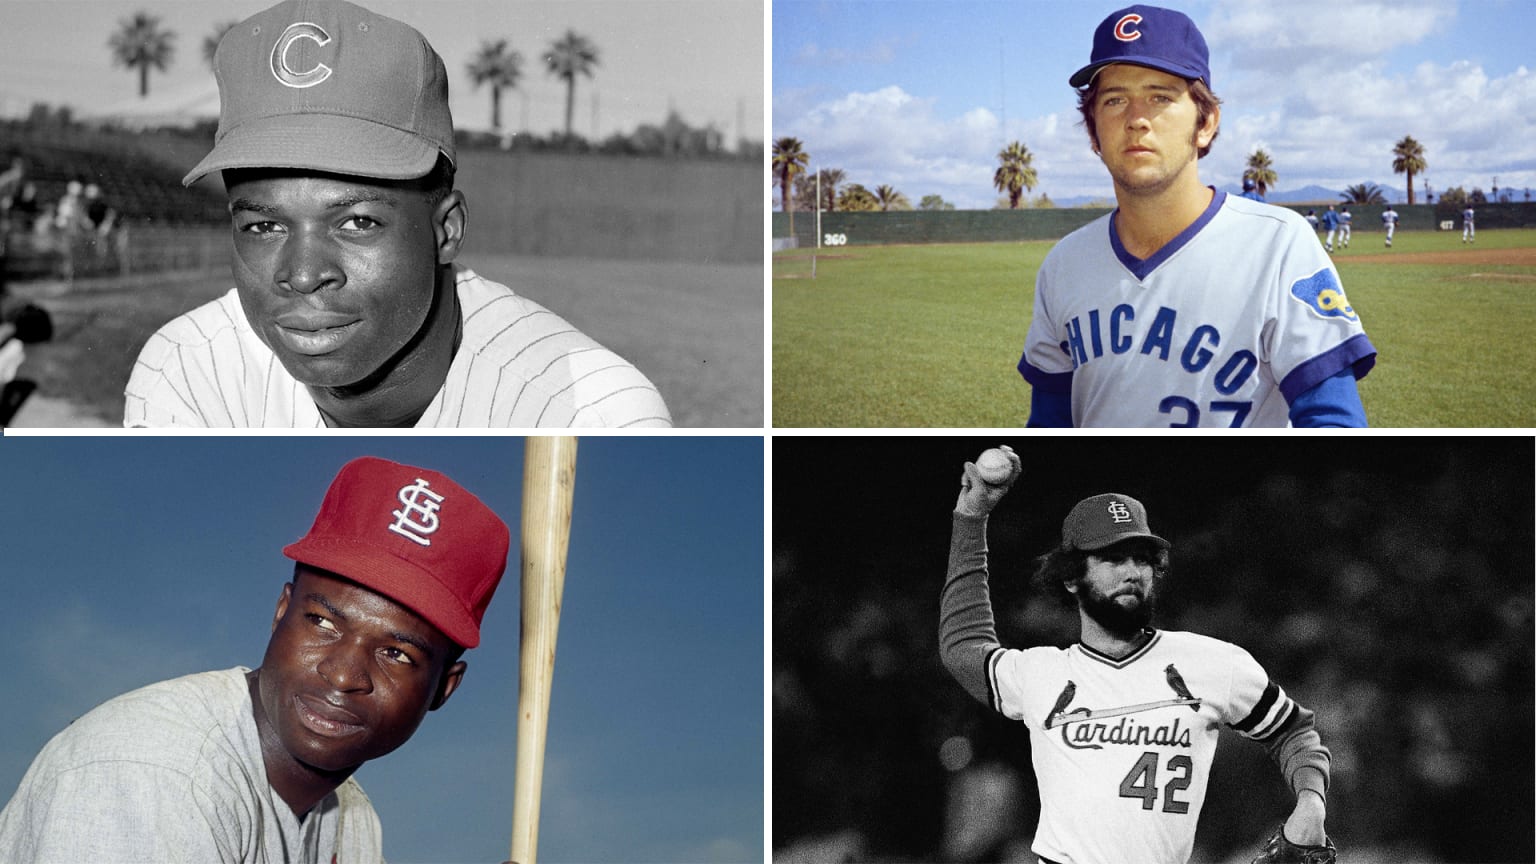 Images of four players, two from the Cubs and two from the Cardinals